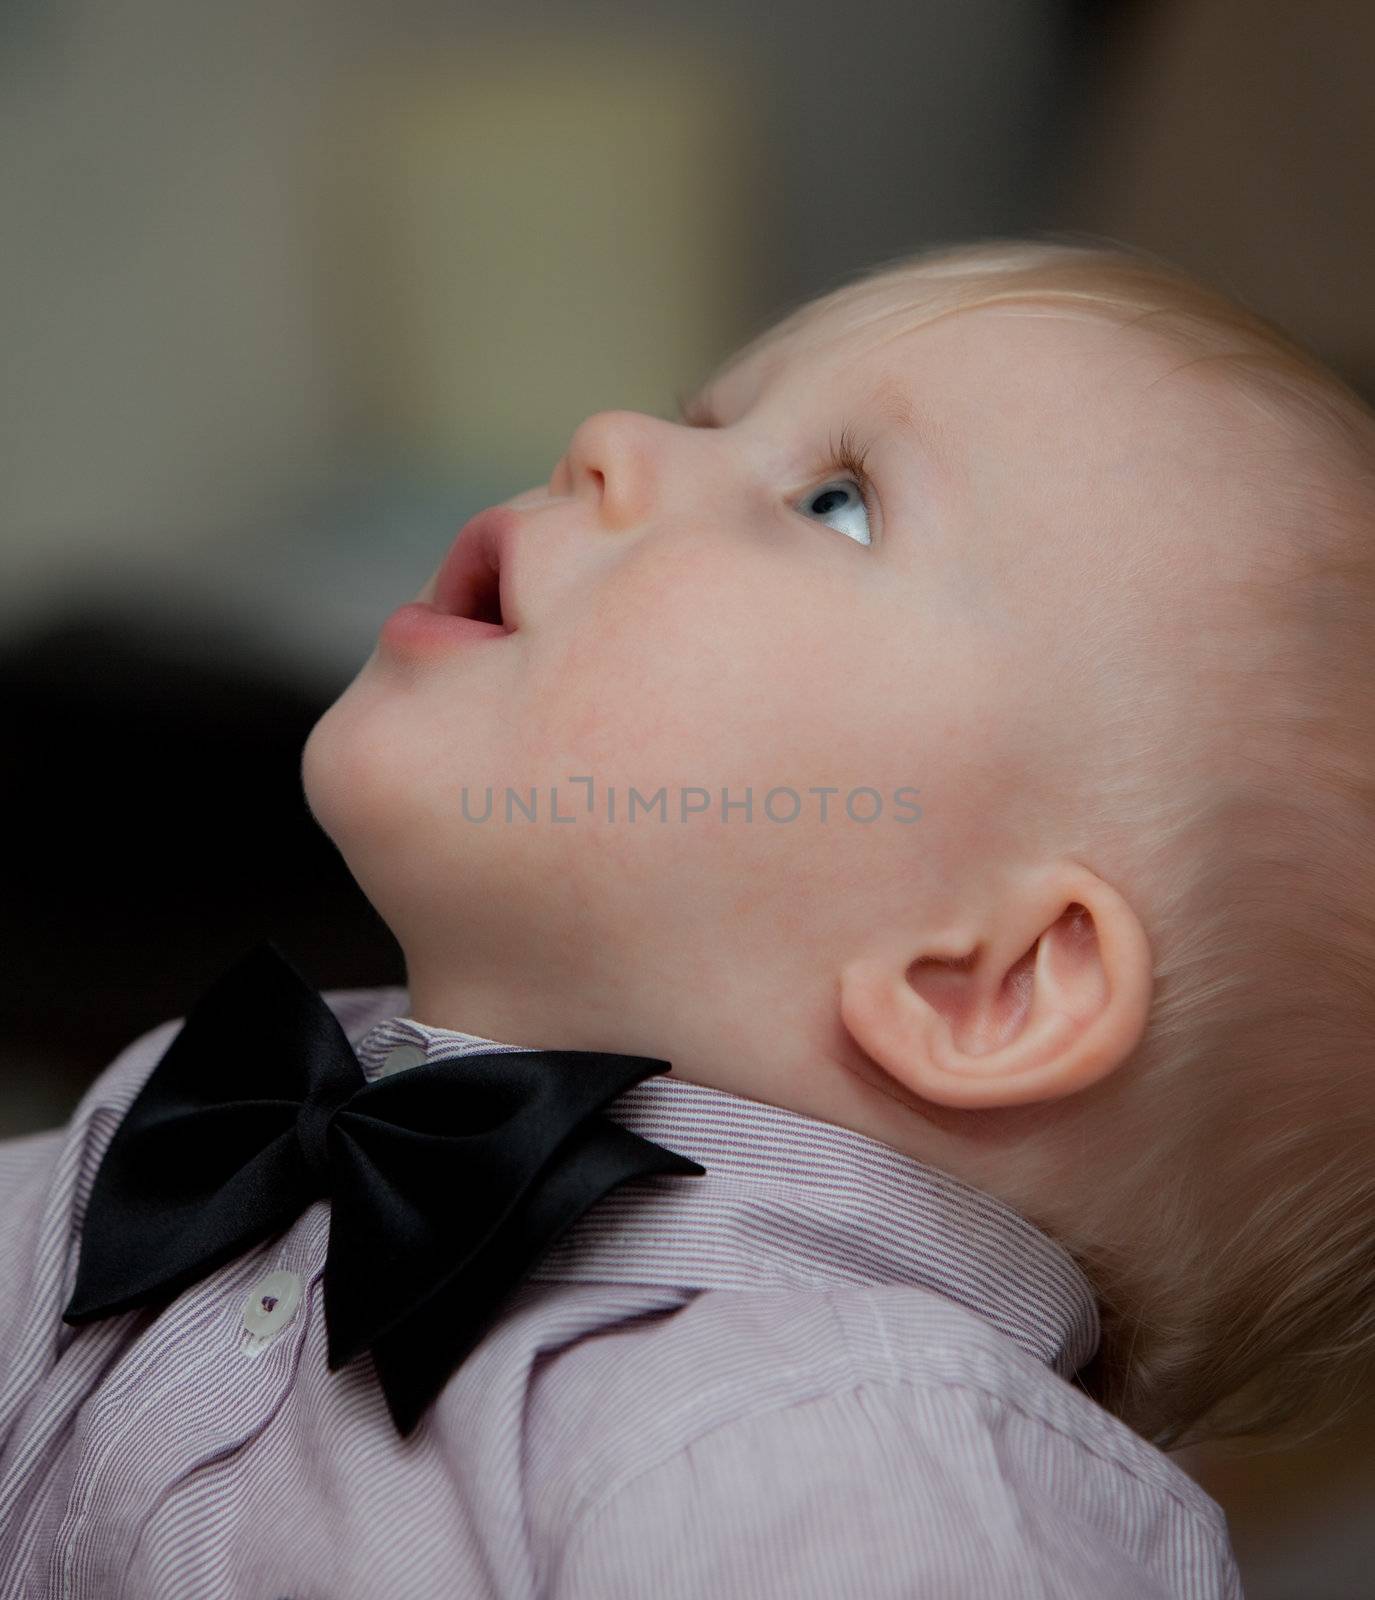 small child with bow tie. little baby